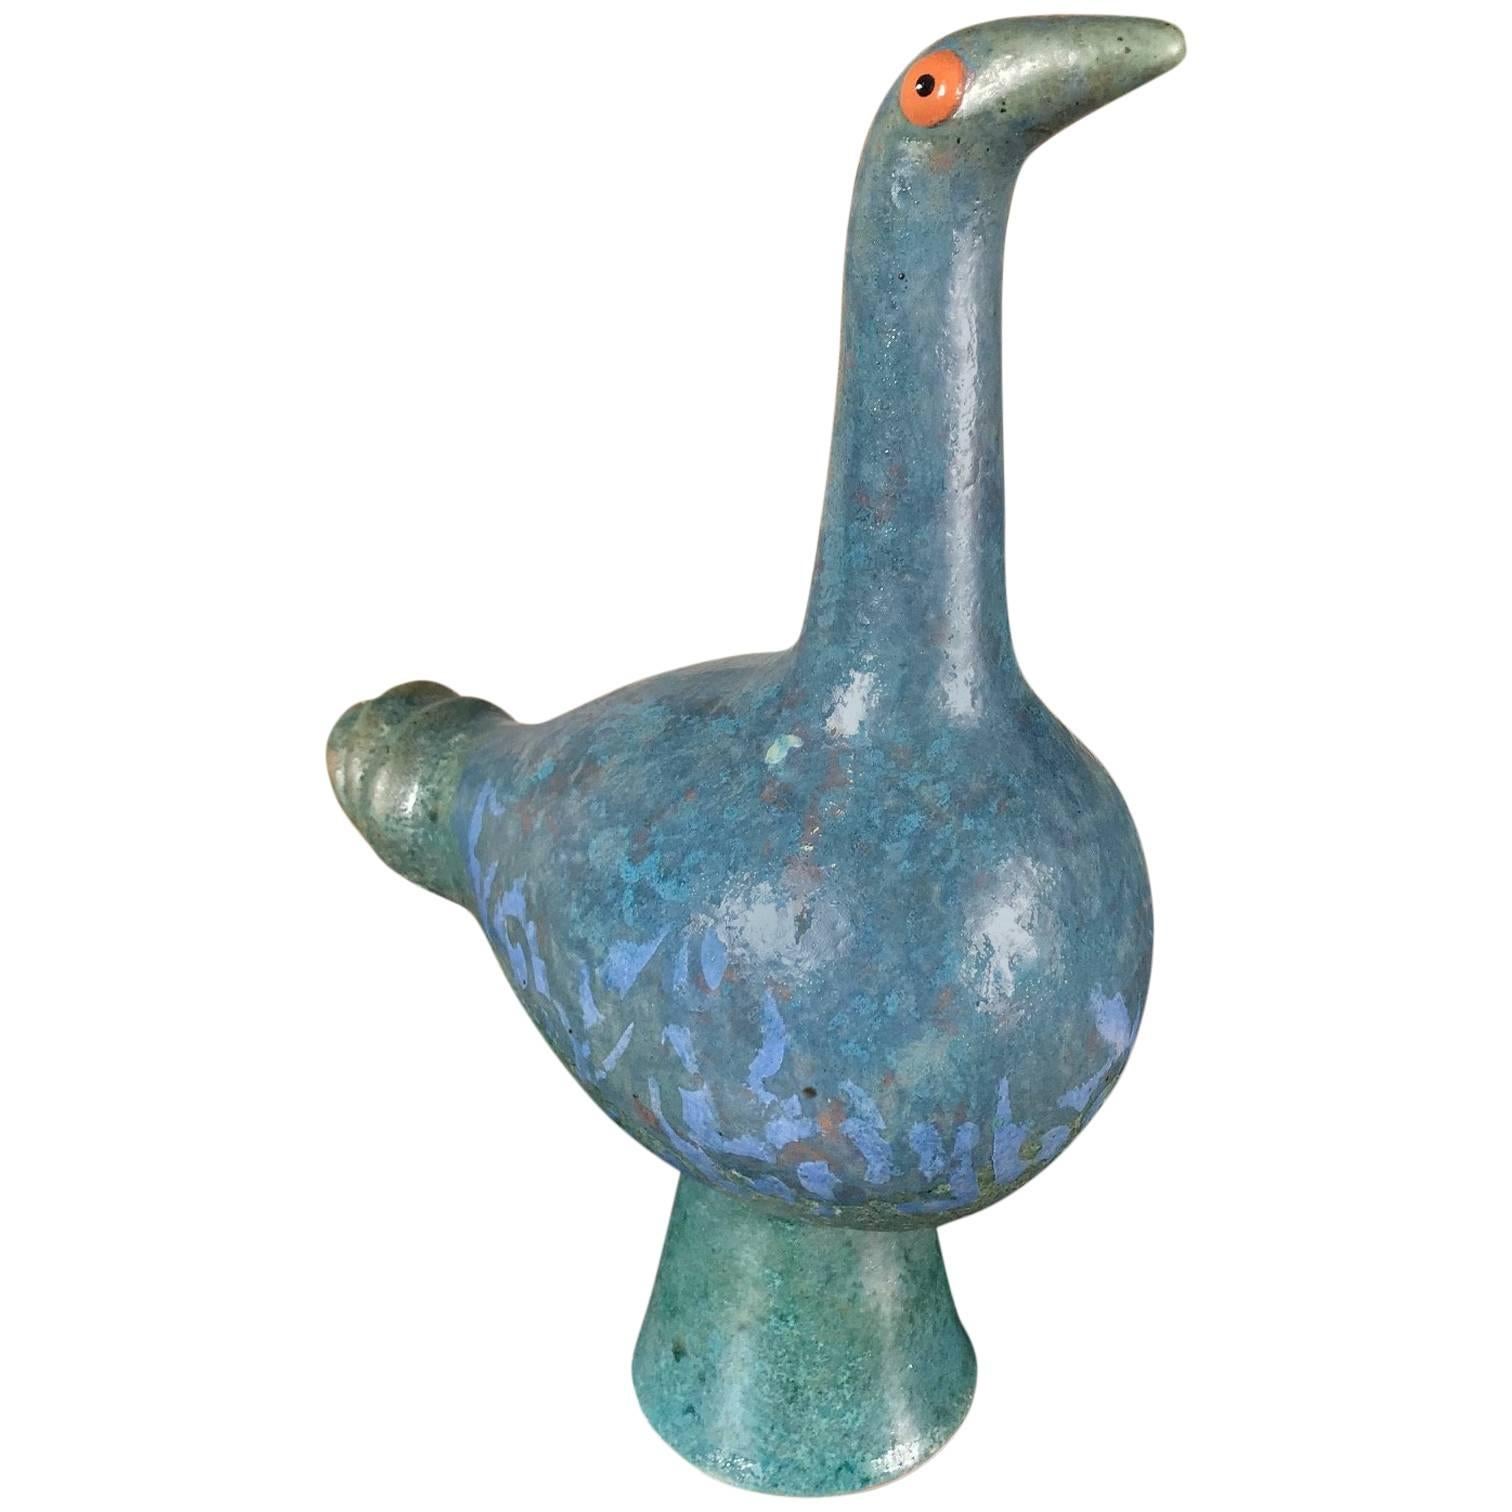 Whimsical Blue Bird Sculpture Hand-Painted by Eva Fritz-Lindner